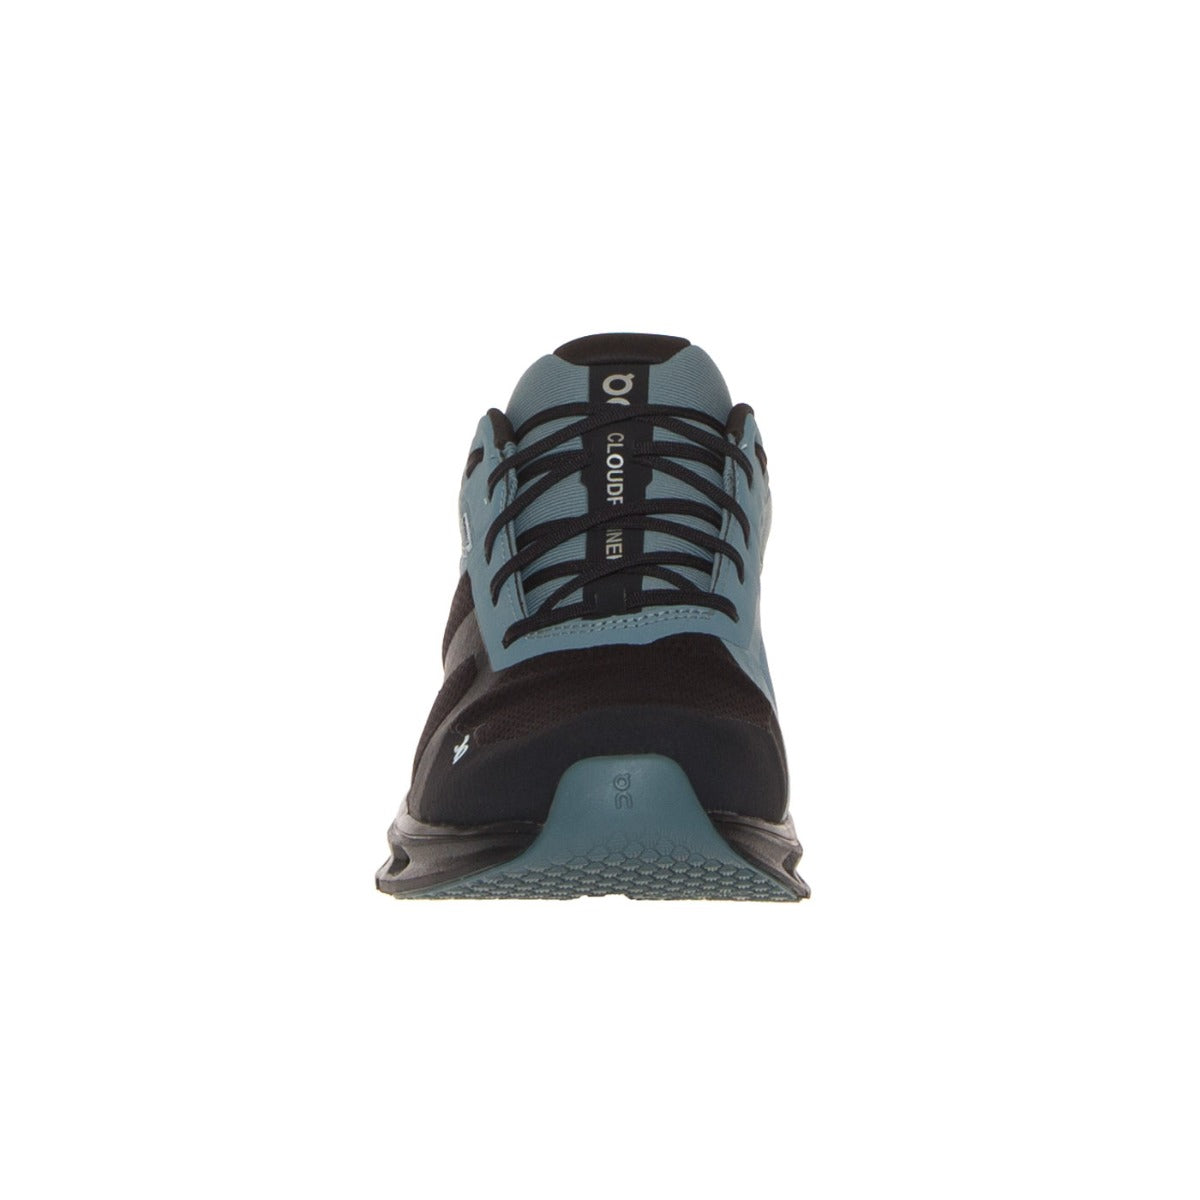 on-5298638-woterfroof-sportiva-uomo